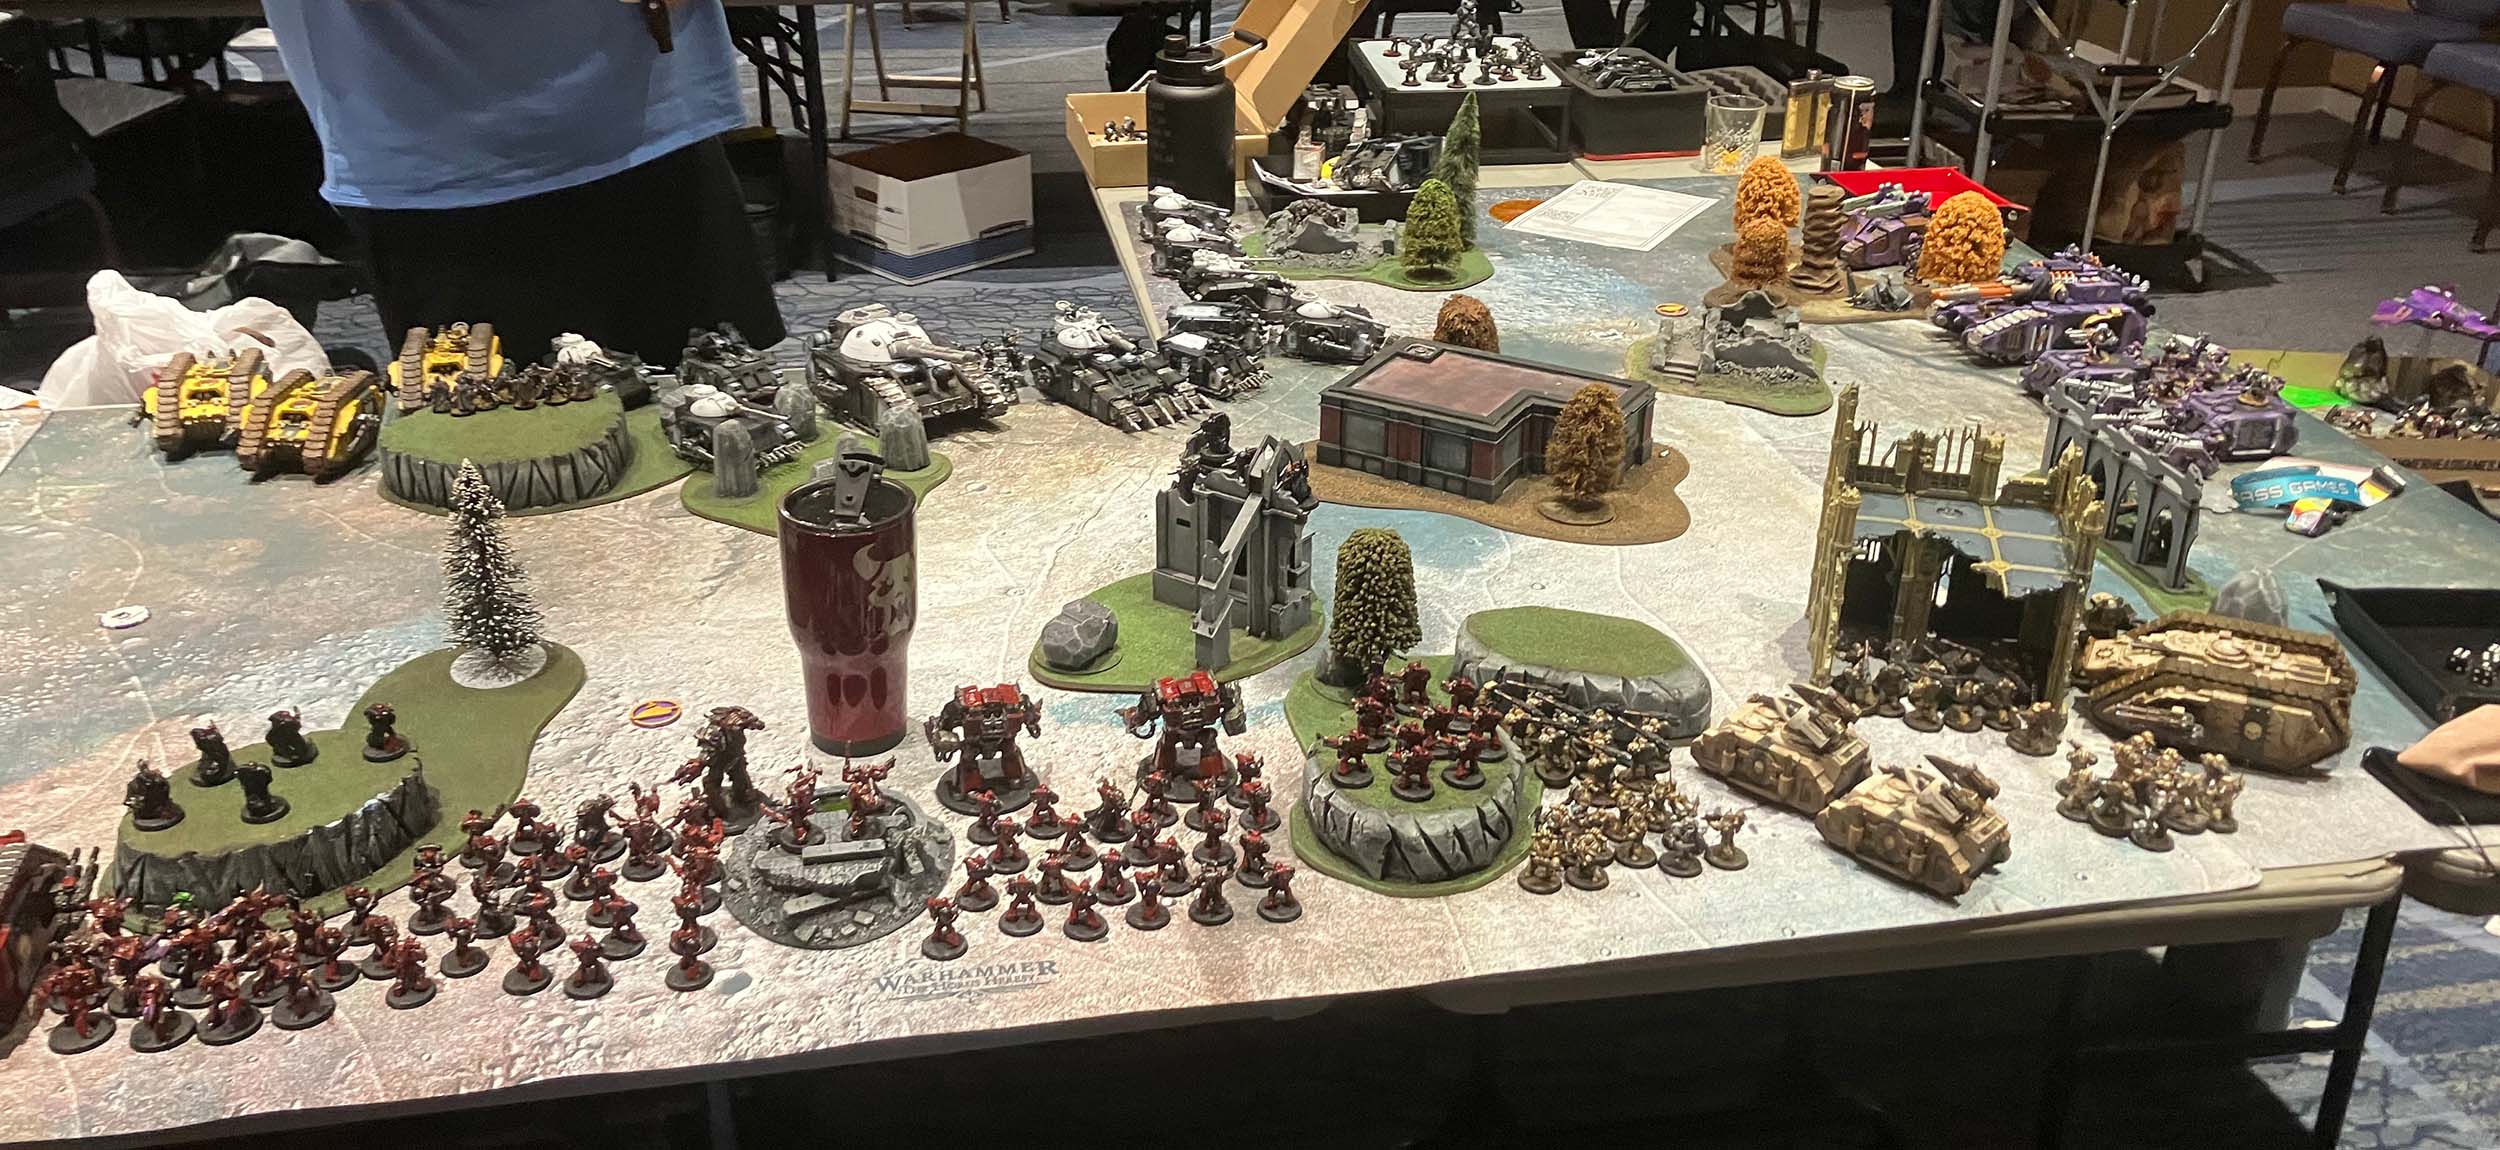 Our flank of the mega-battle table